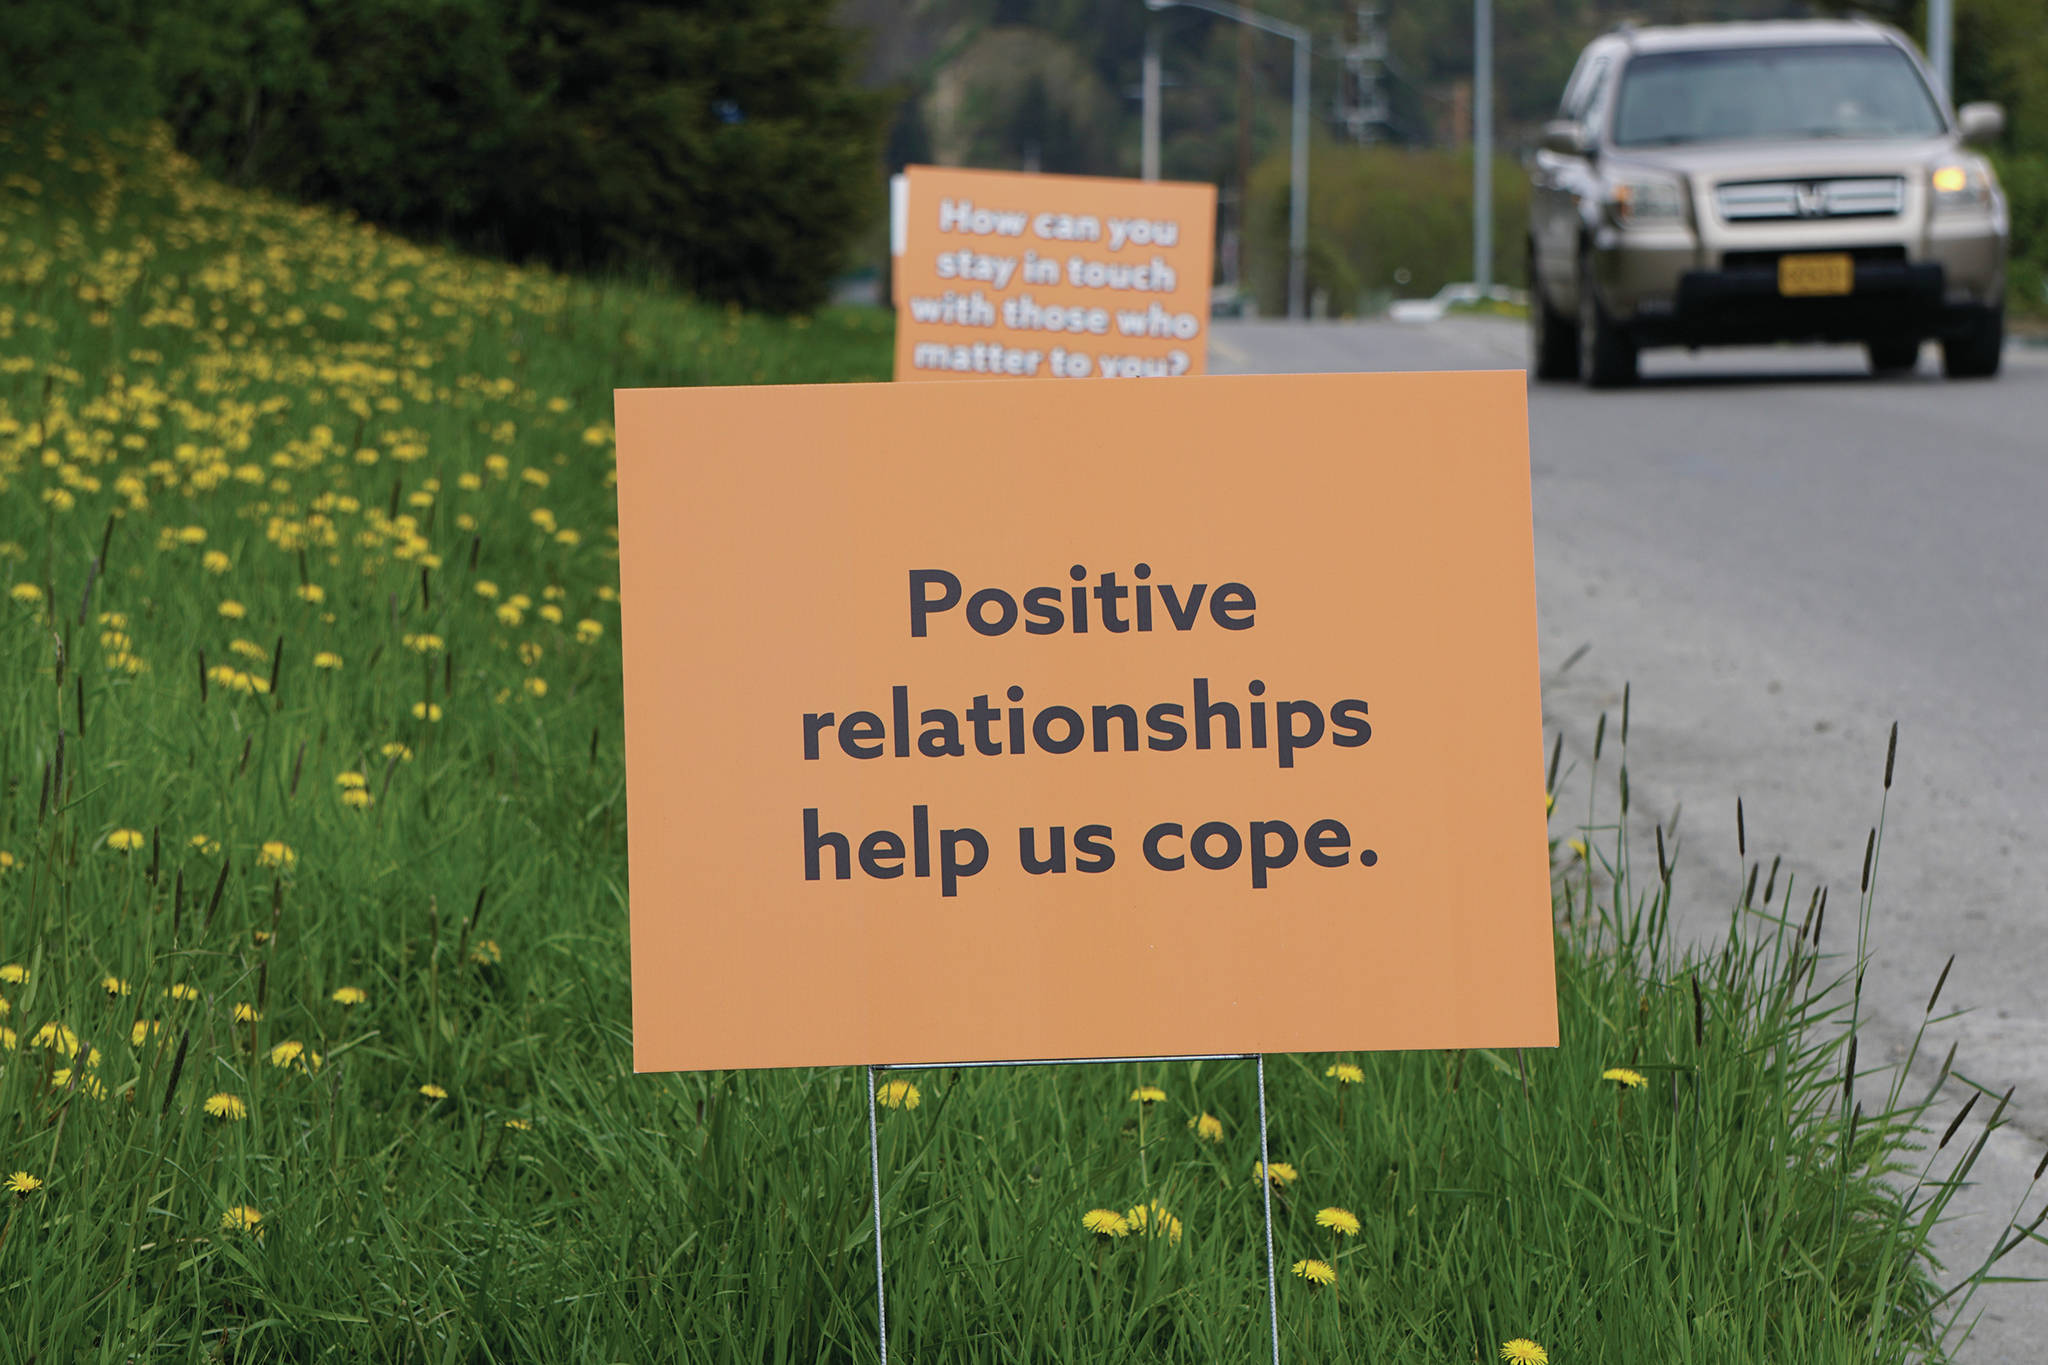 A series of signs on May 22, 2020, line Heath Street by the Homer Public Library in Homer, Alaska. Put up by the South Kenai Peninsula Resiliency Coalition, they read “Right now you may be feeling stress. Positive relationships help us cope. How can you stay in touch with those who matter to you?” (Photo by Michael Armstrong/Homer News)